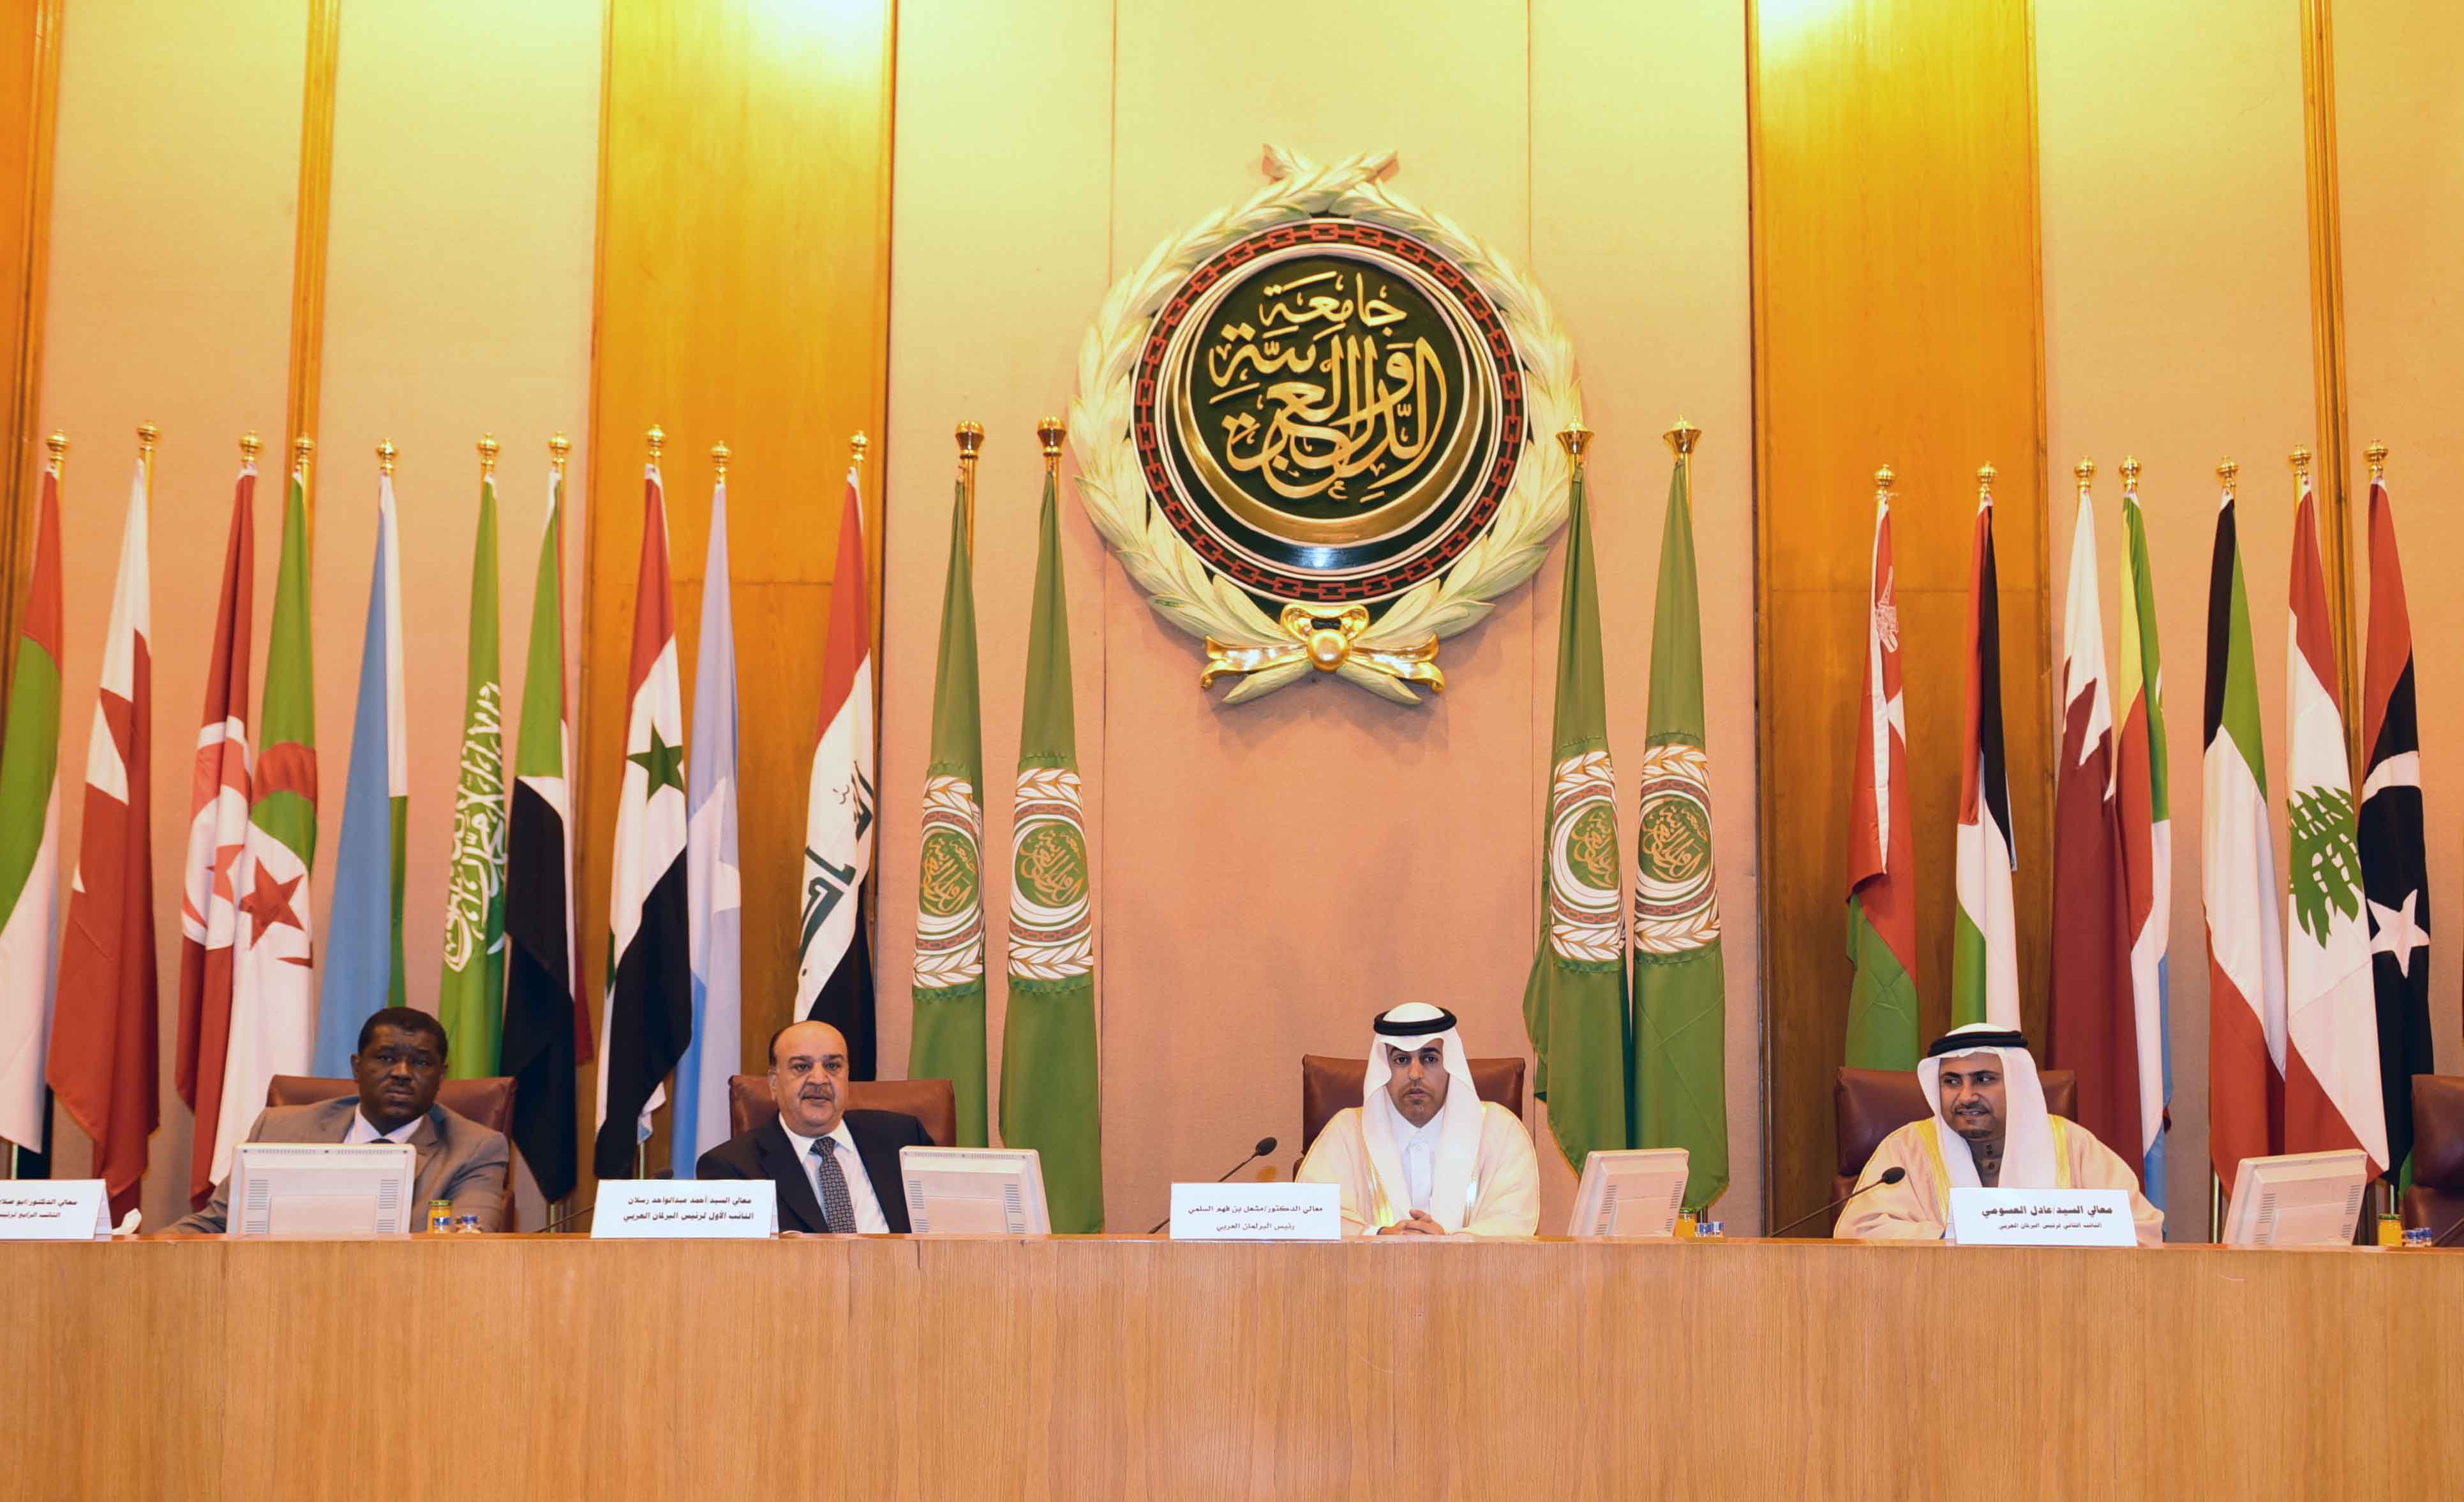 The 4th session of the Arab parliament